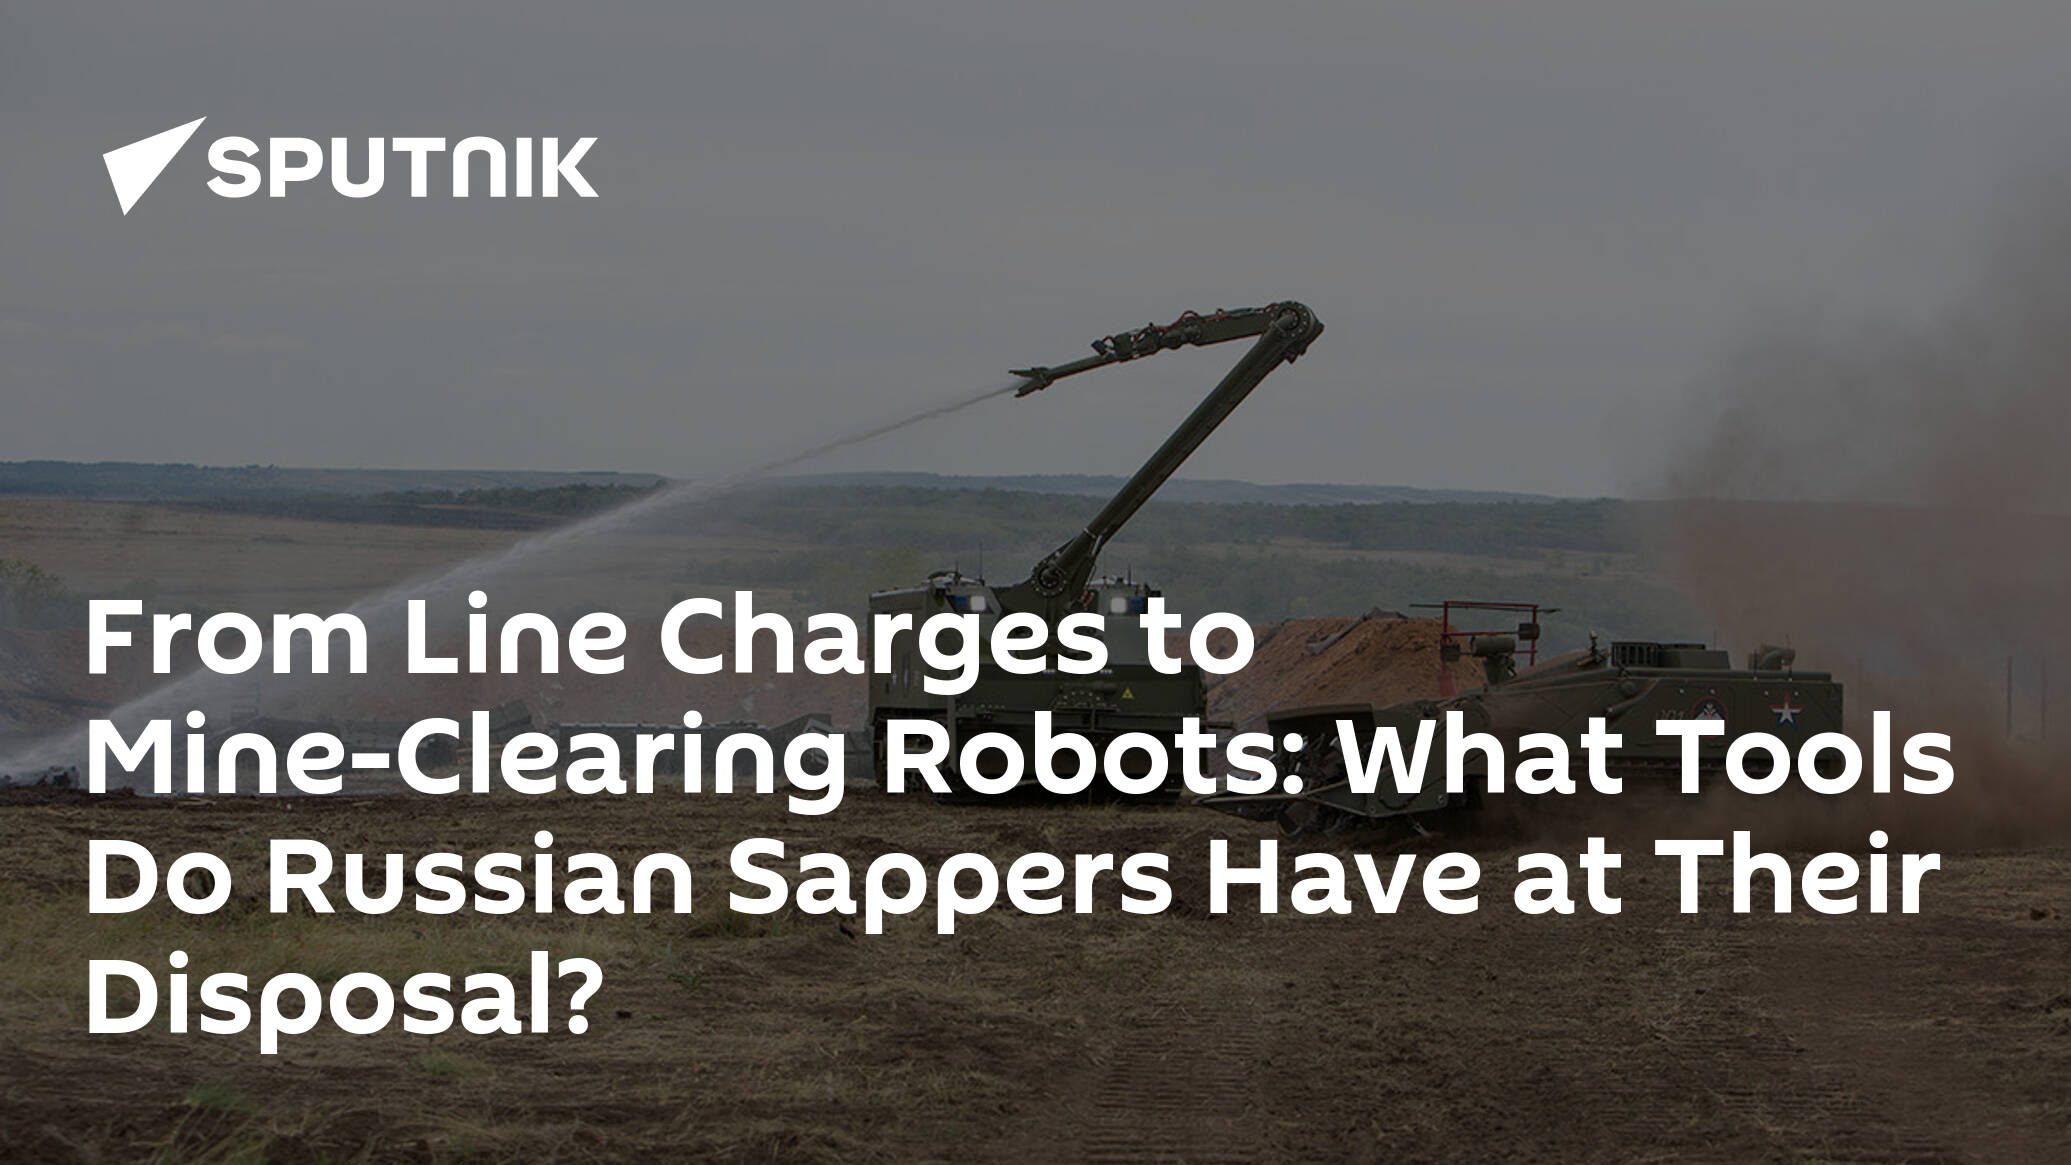 From Line Charges to Mine-Clearing Robots: What Tools Do Russian Sappers Have at Their Disposal?